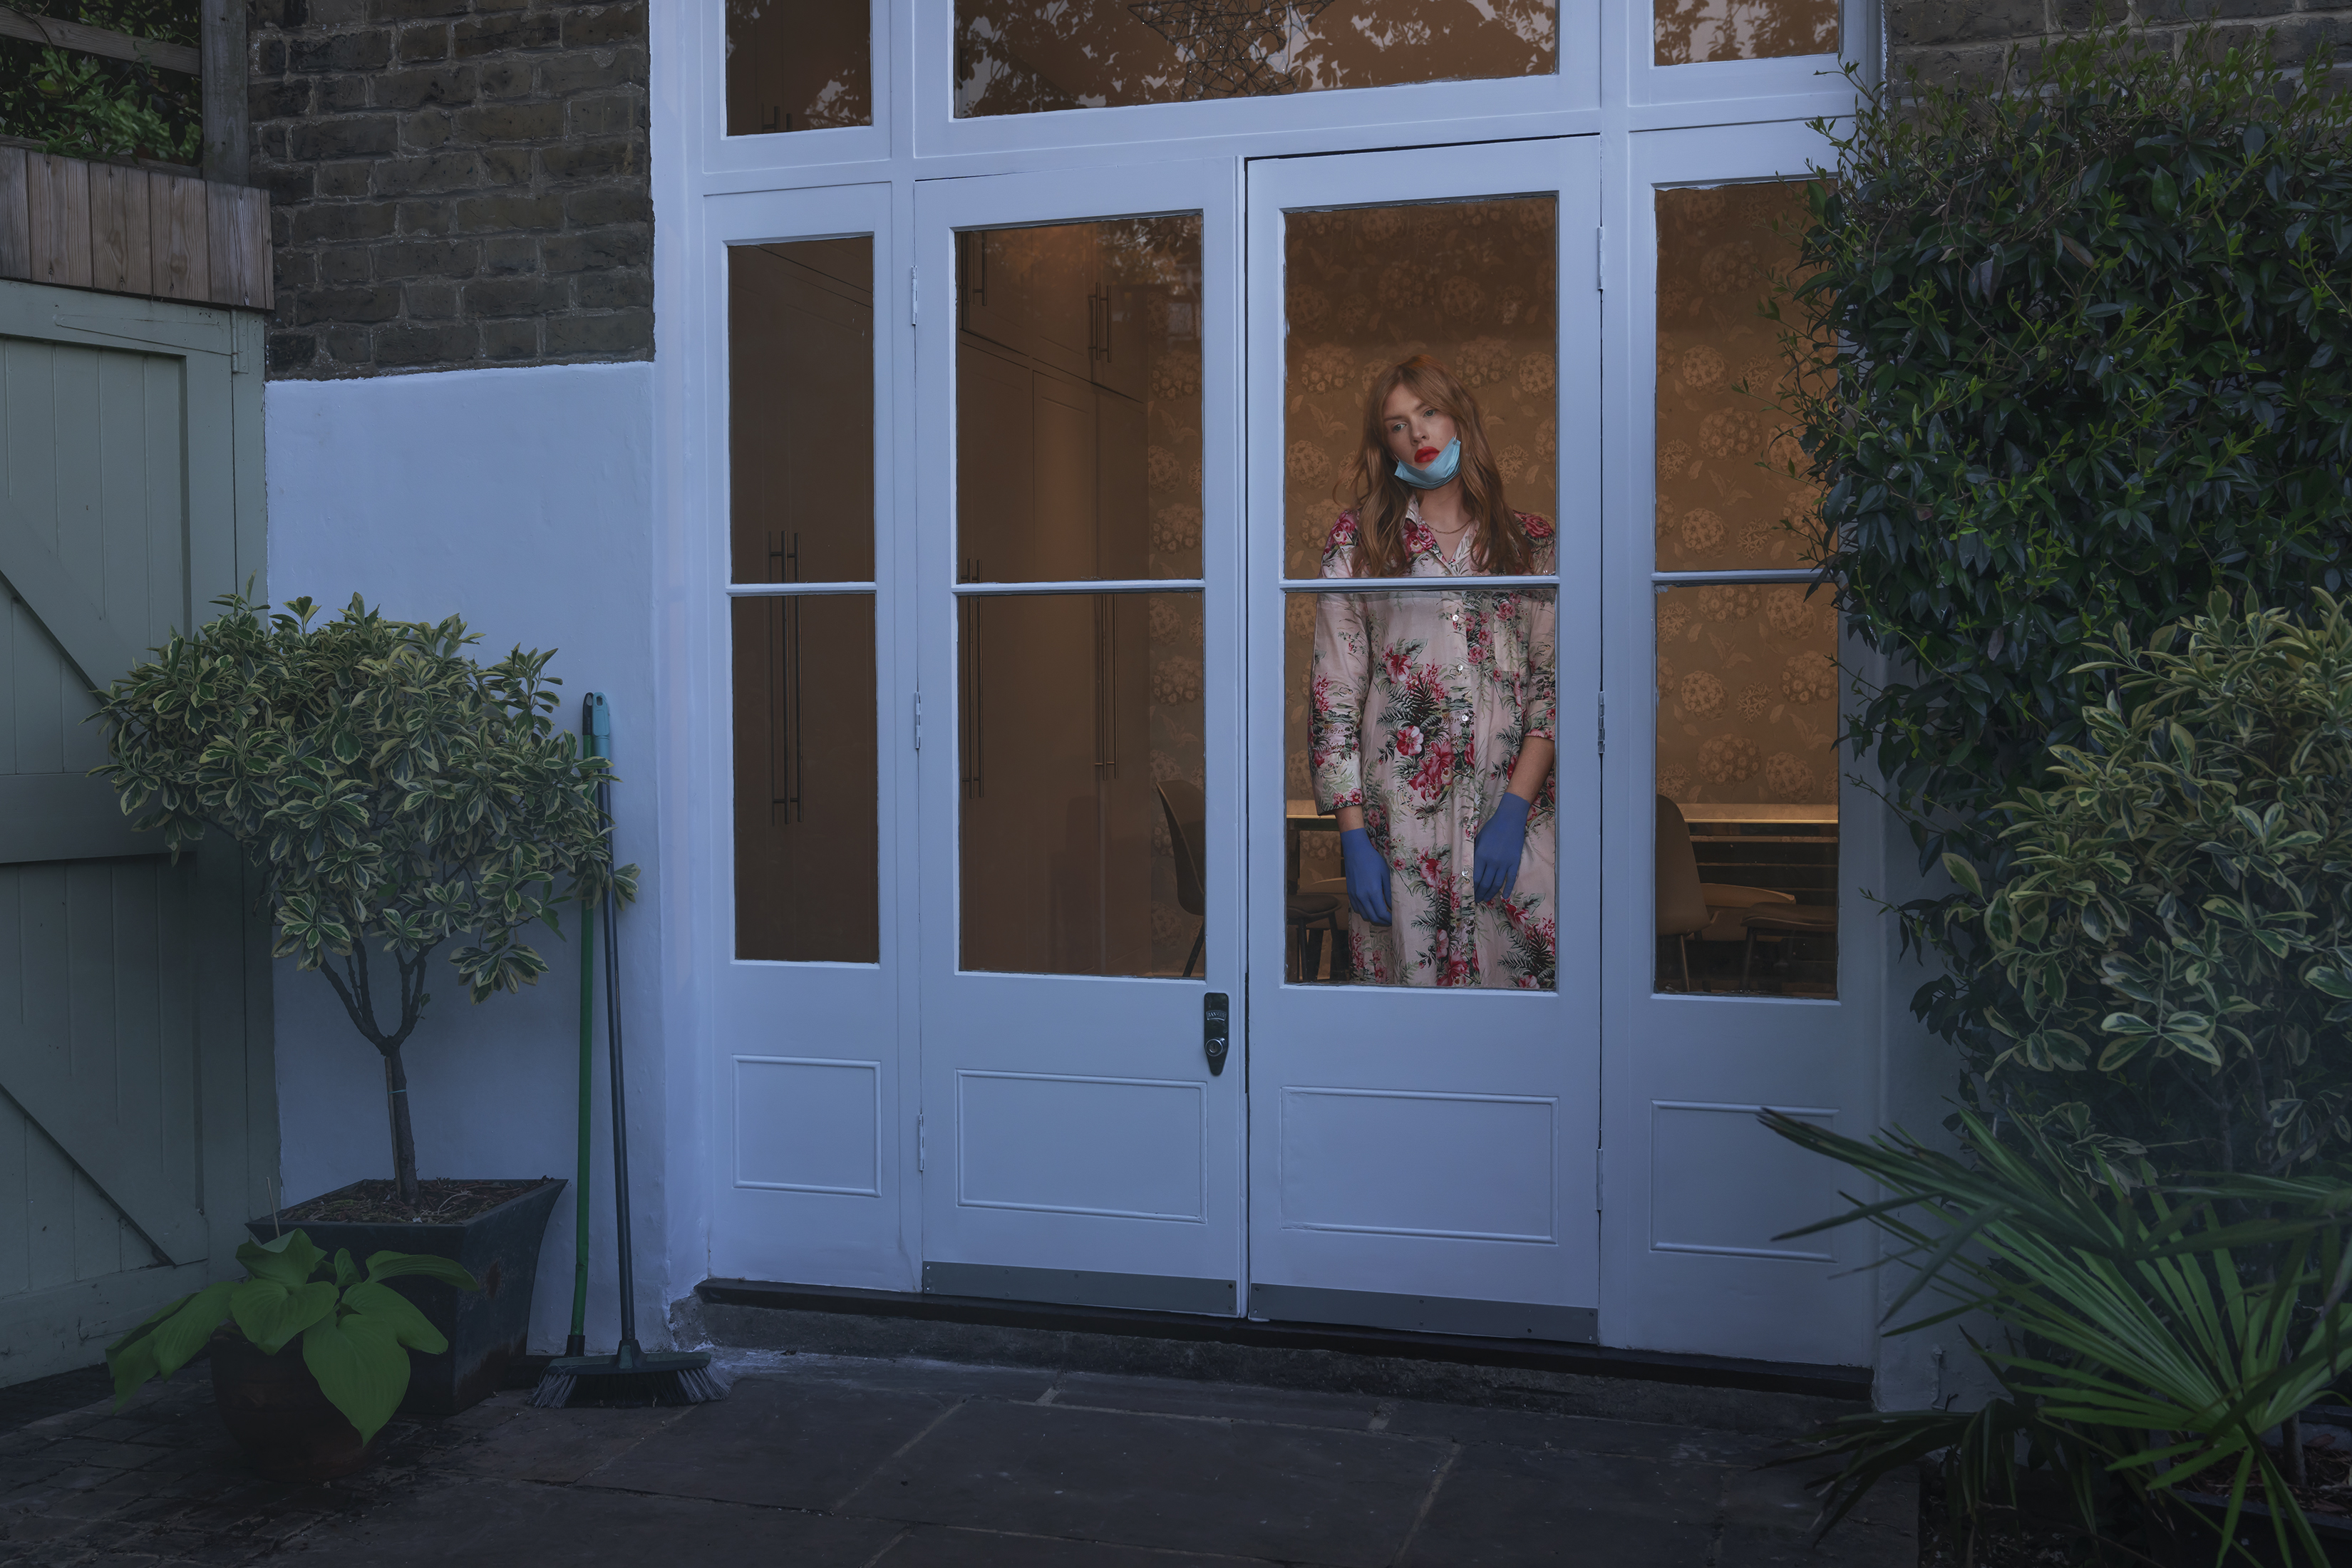 Bethan looks out on to her garden in floral dress and face mask